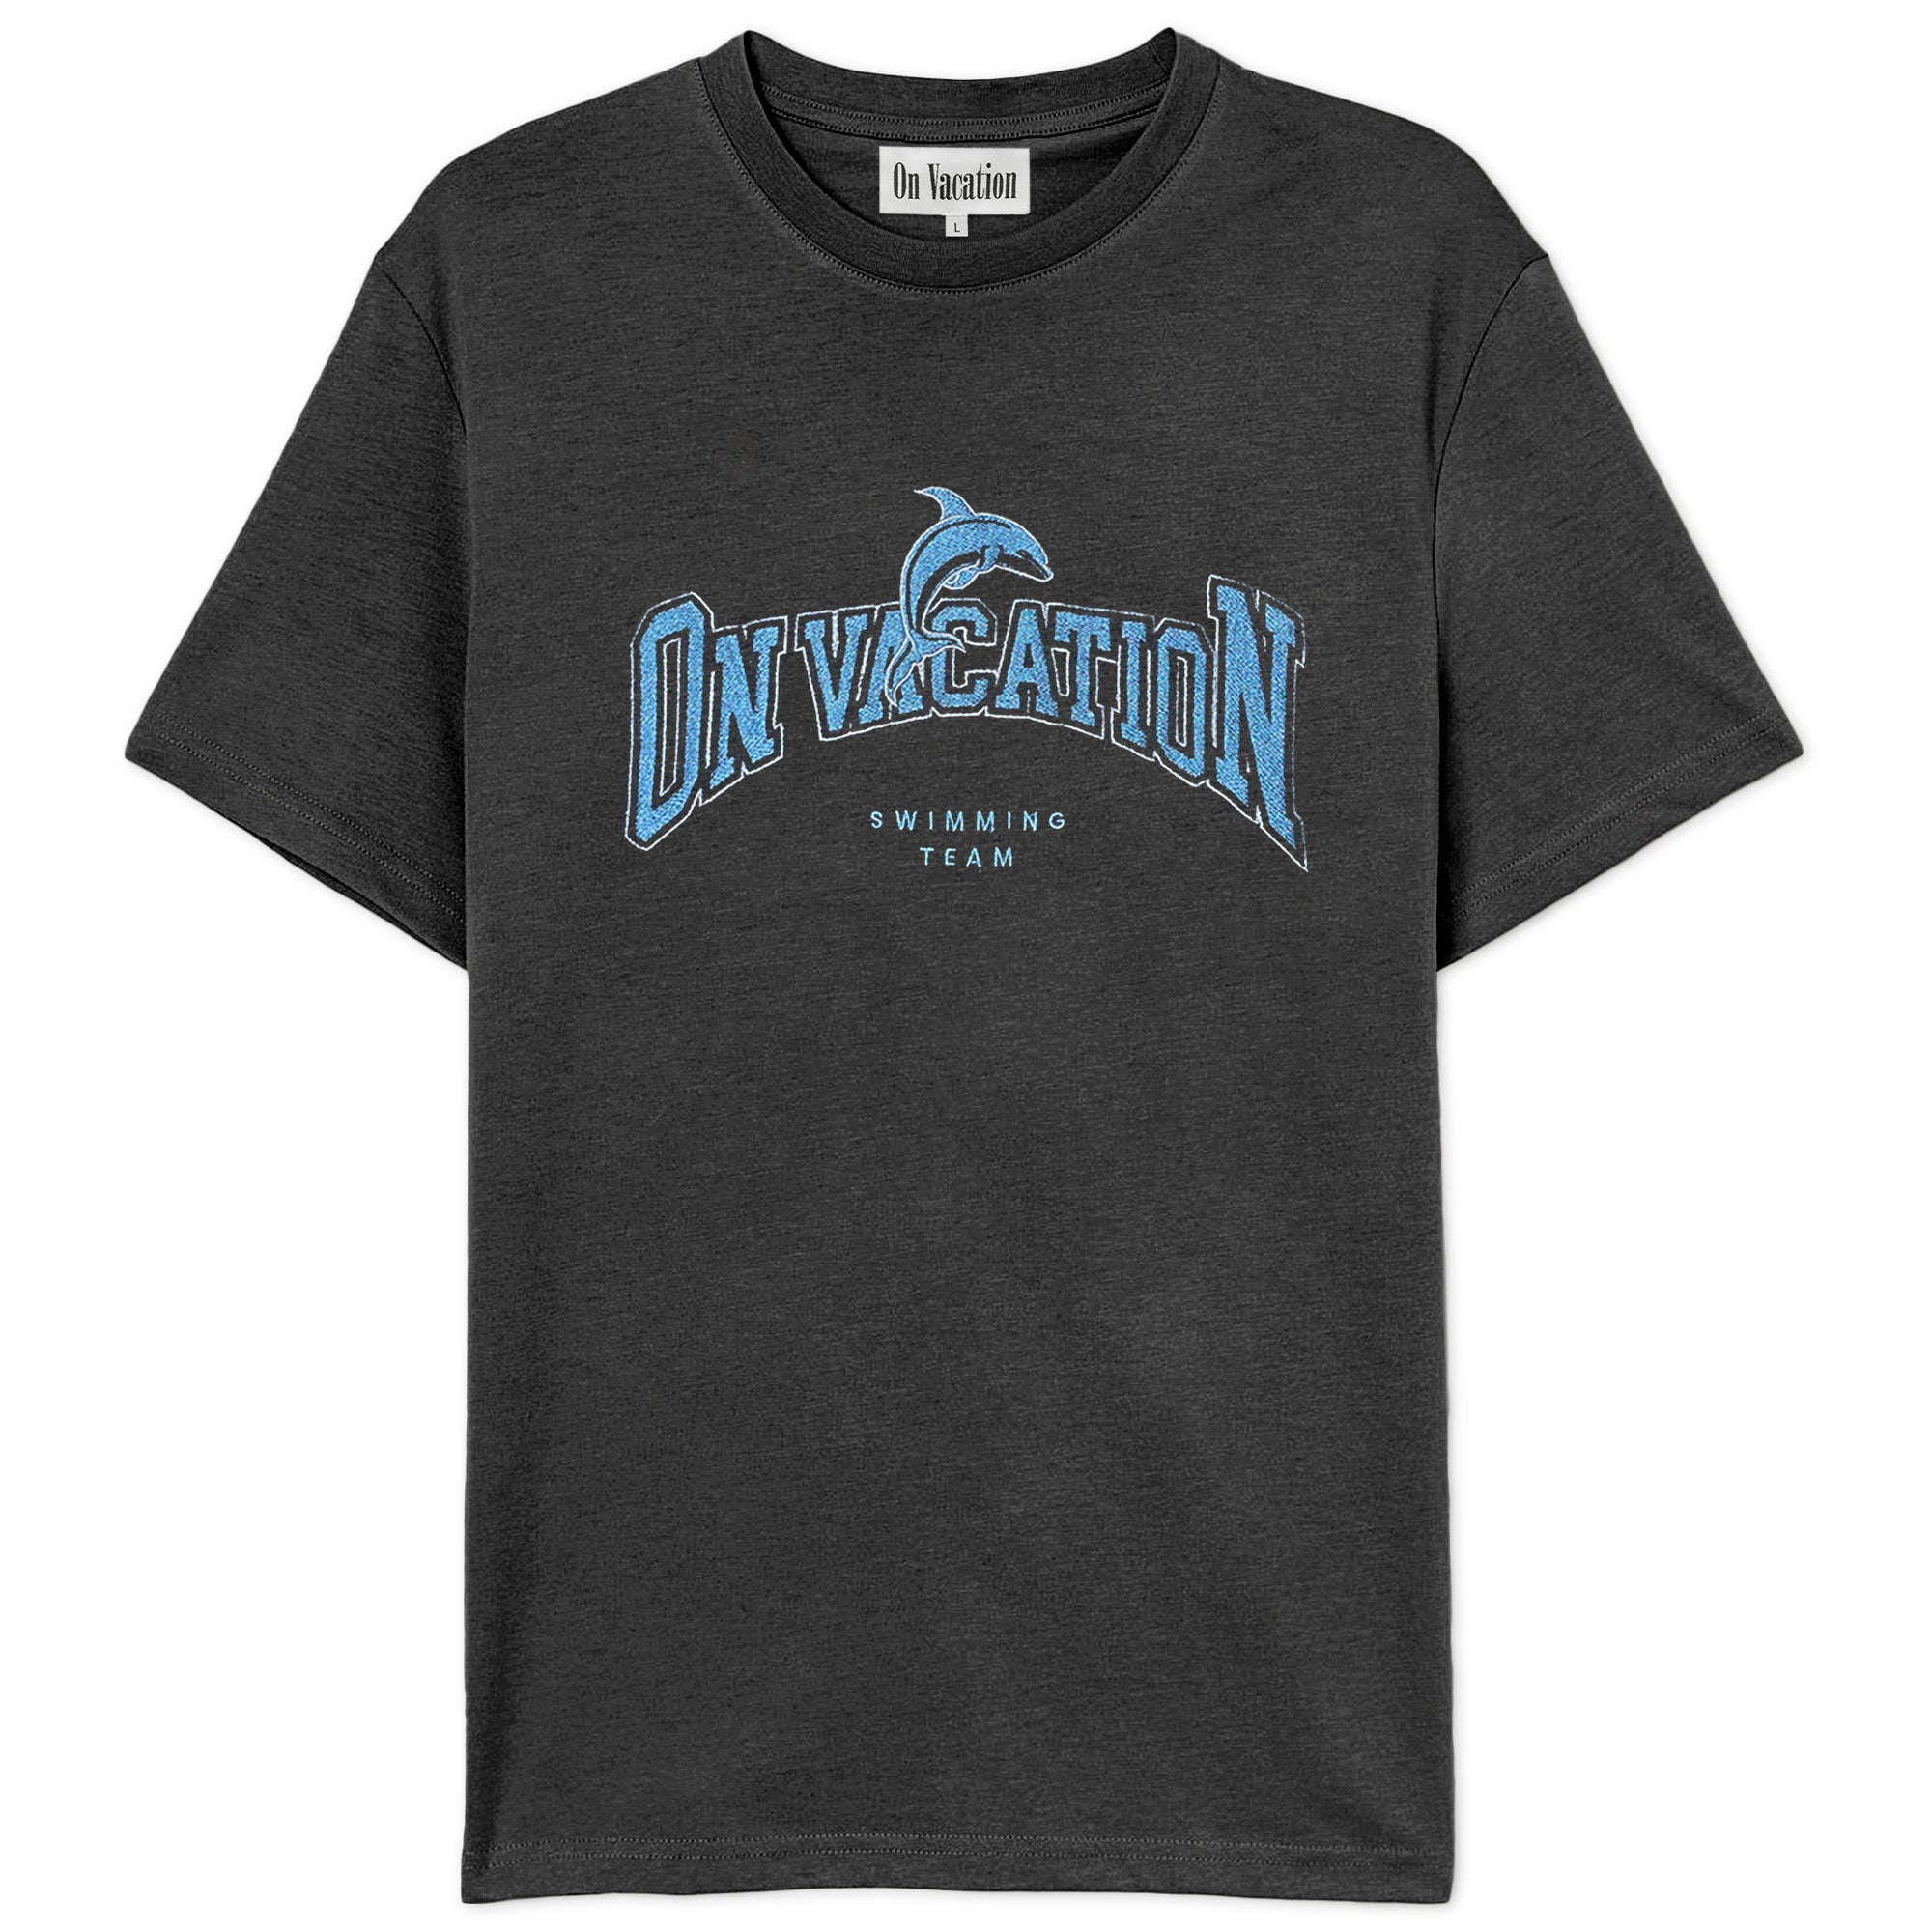 On Vacation Ladies T-Shirt "Dolphin League" - Washed Black